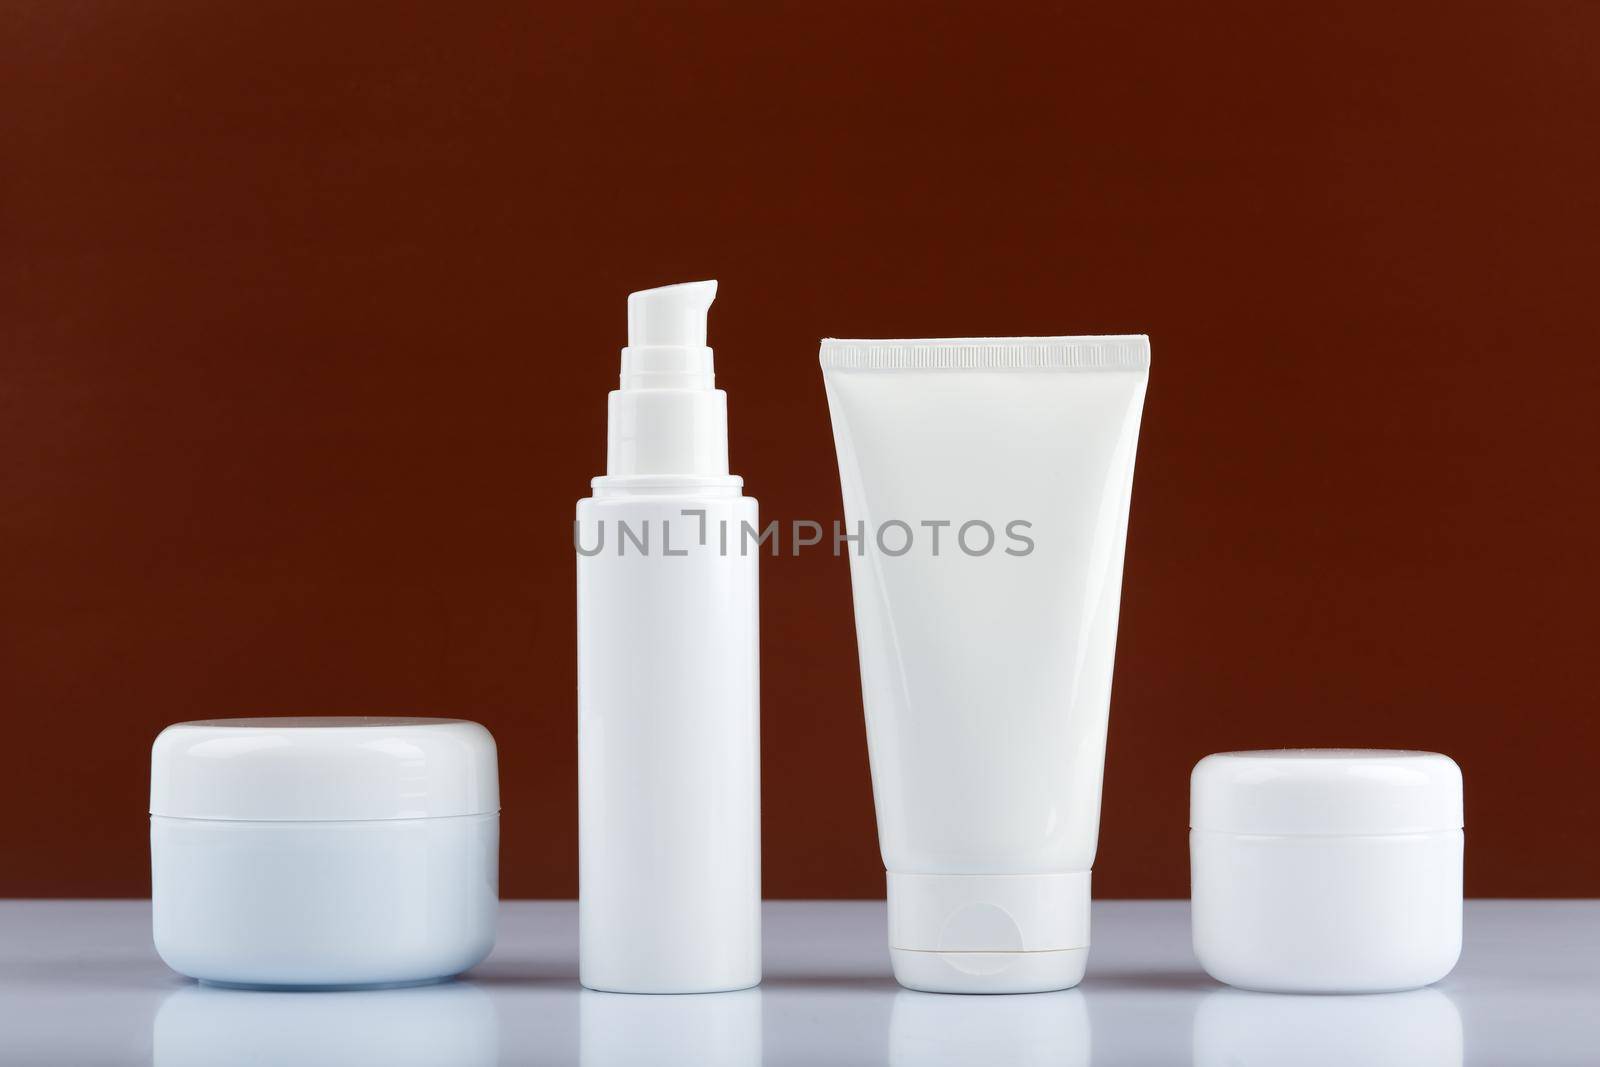 Minimalistic still life with set of beauty products for men on white glossy table against dark brown background. High quality photo